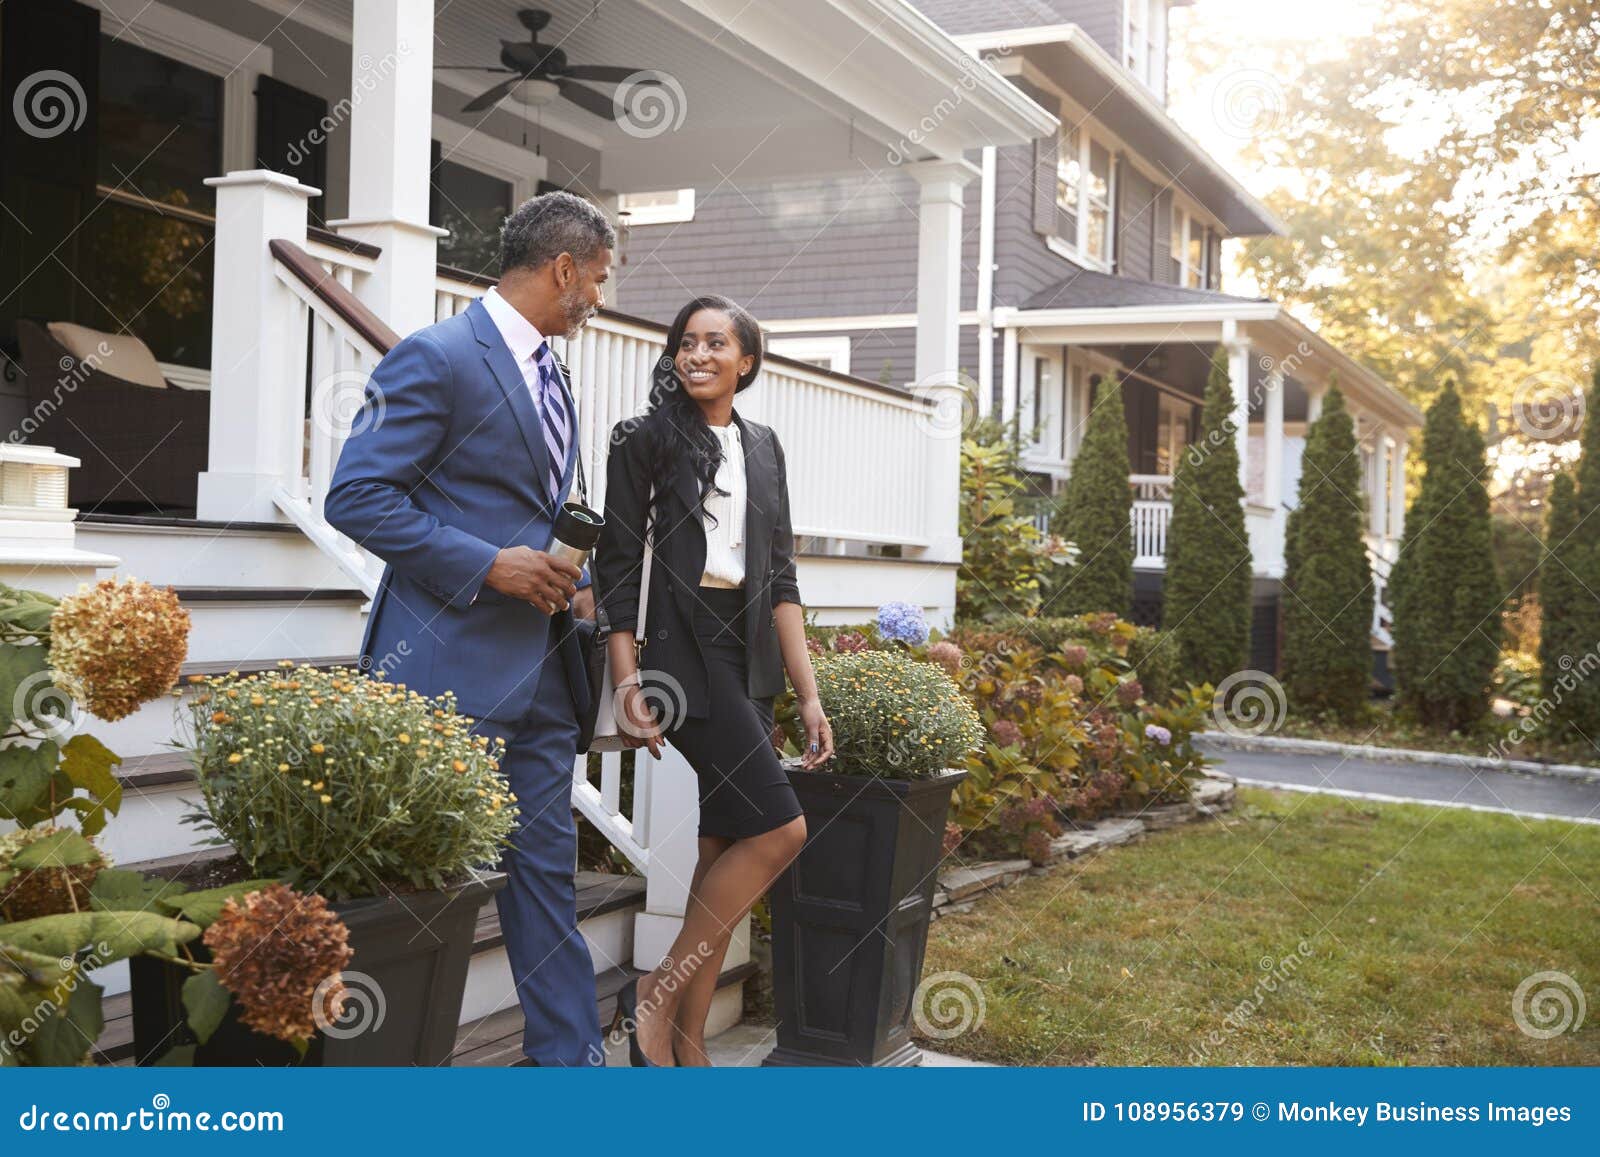 business couple leaving suburban house for commute to work